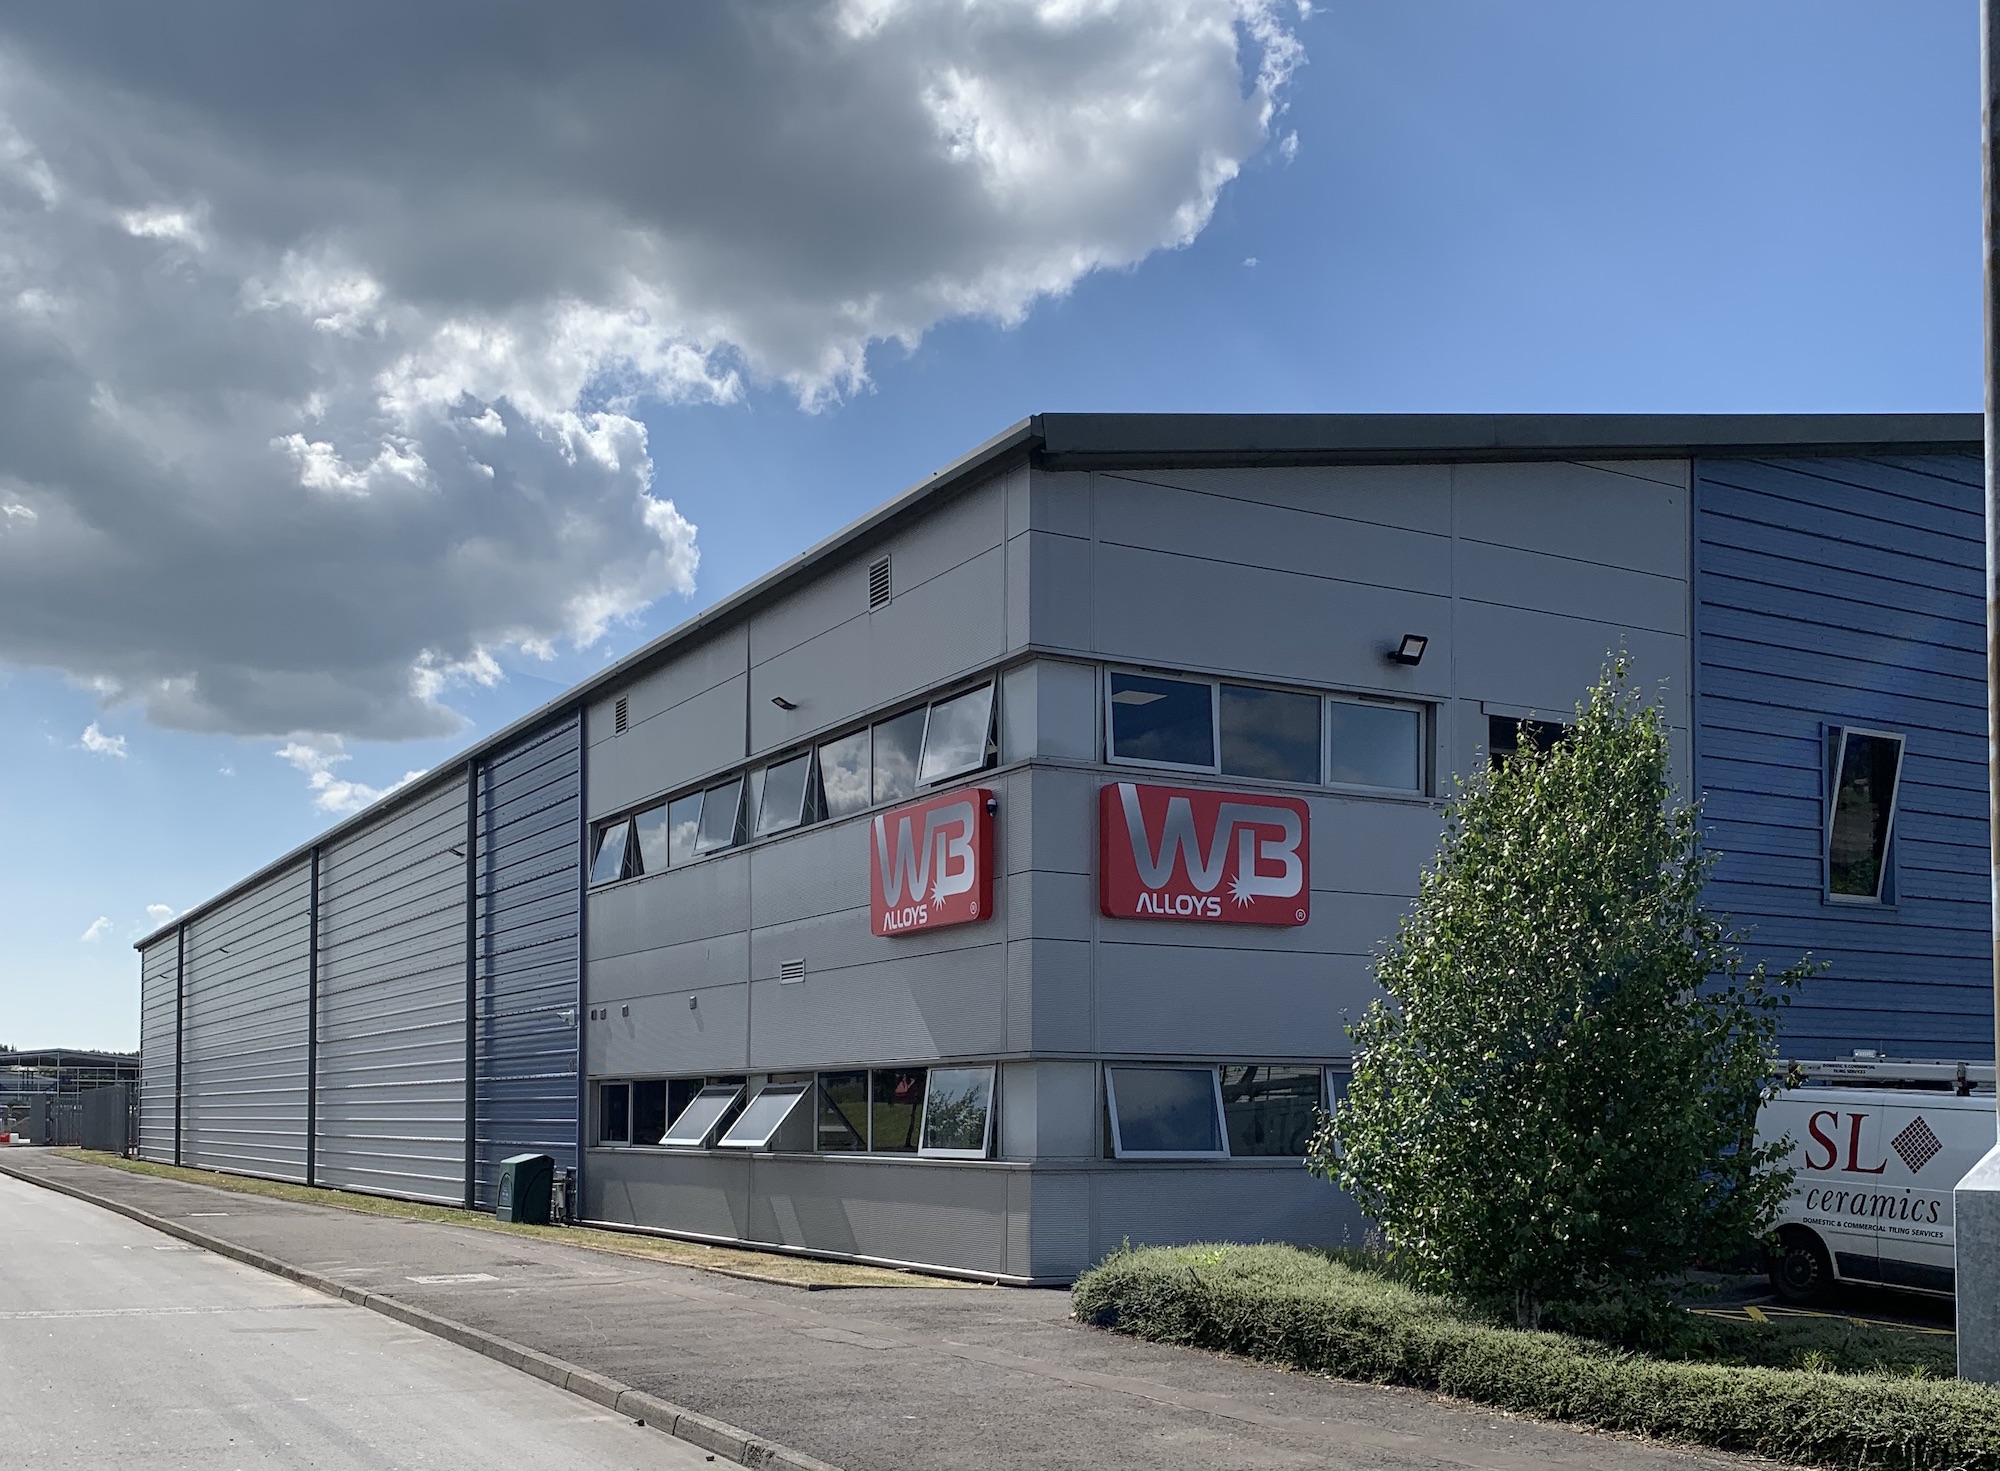 WB Alloys secures £4.8m to expand operations and sets sights on growth during the recession